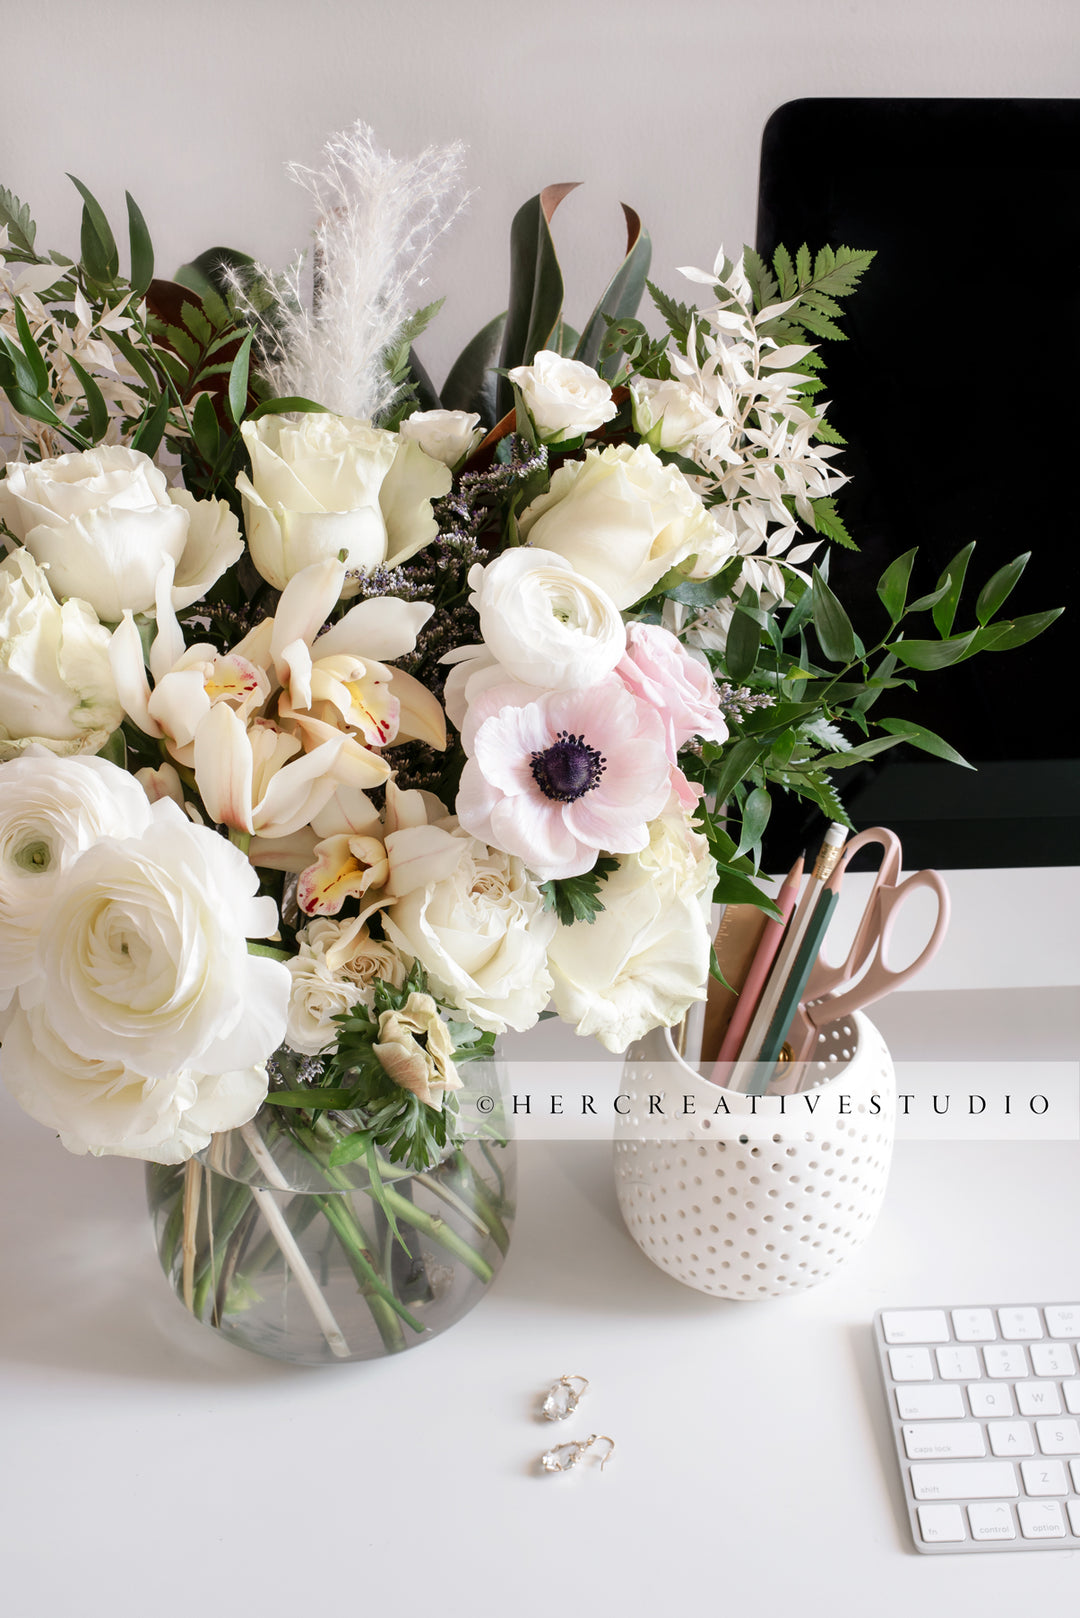 Flowers & Pencil Holder on Pretty Workspace, Styled Stock Image